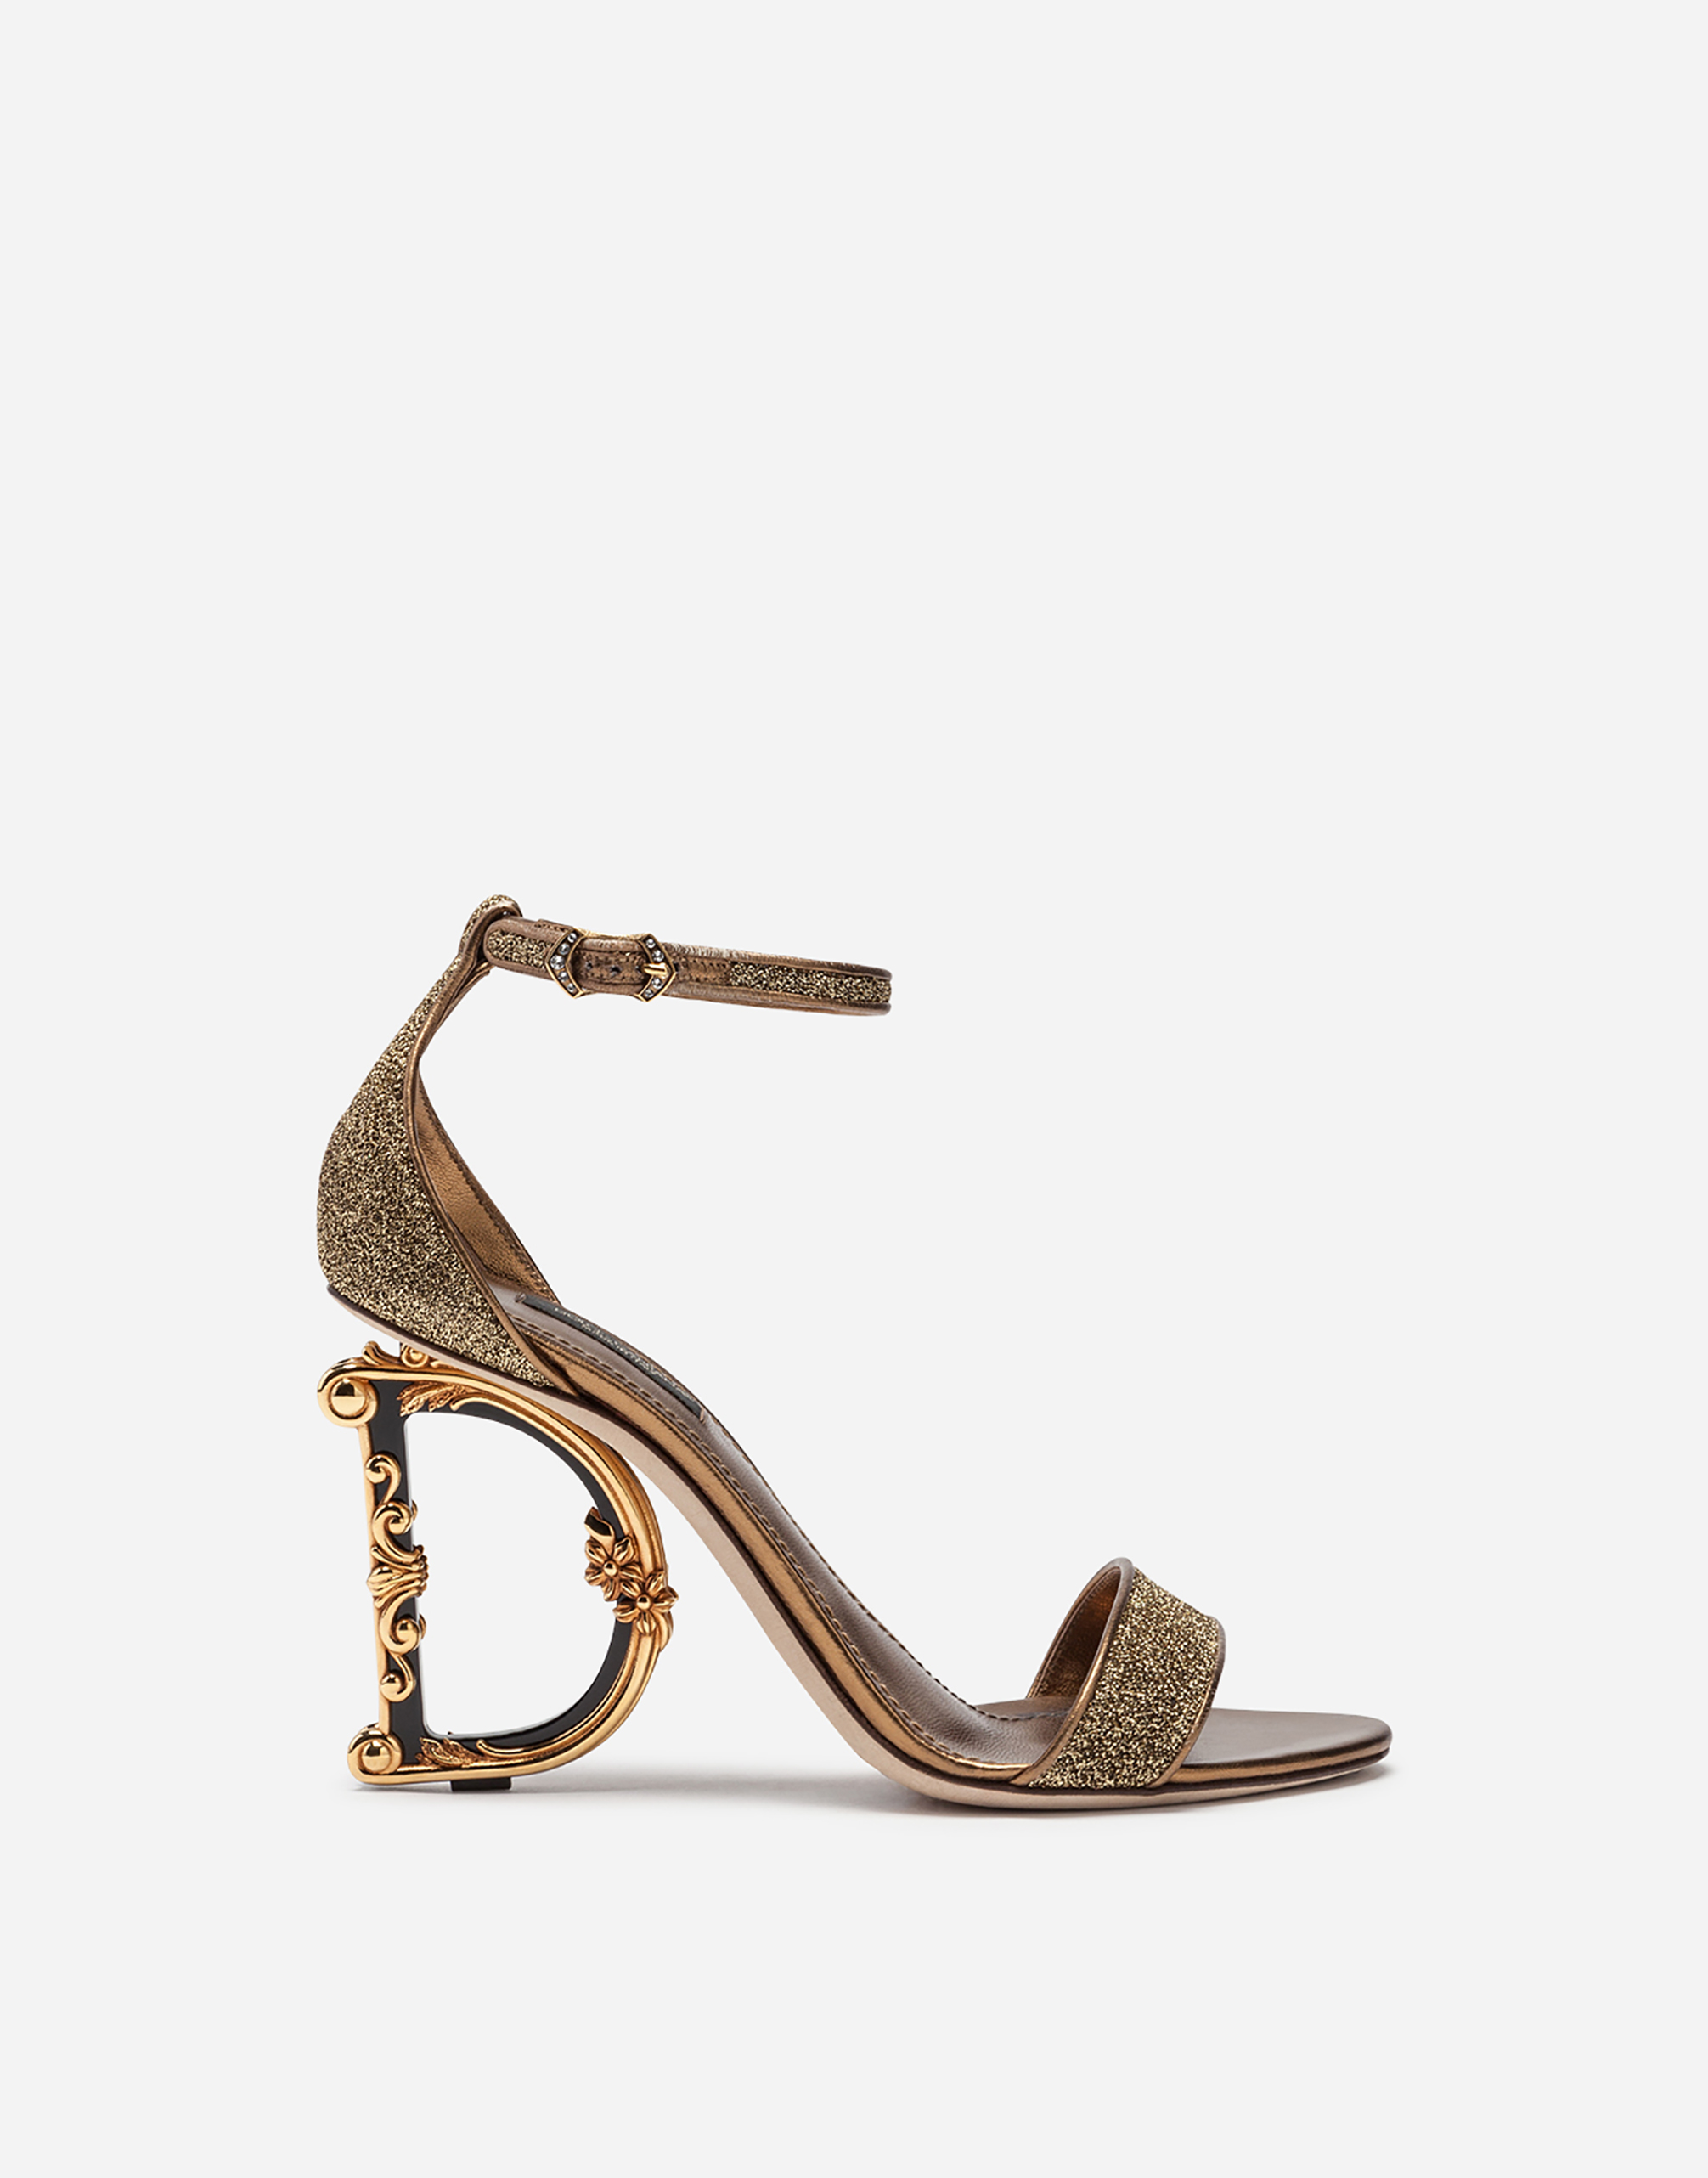 dolce and gabbana heels gold